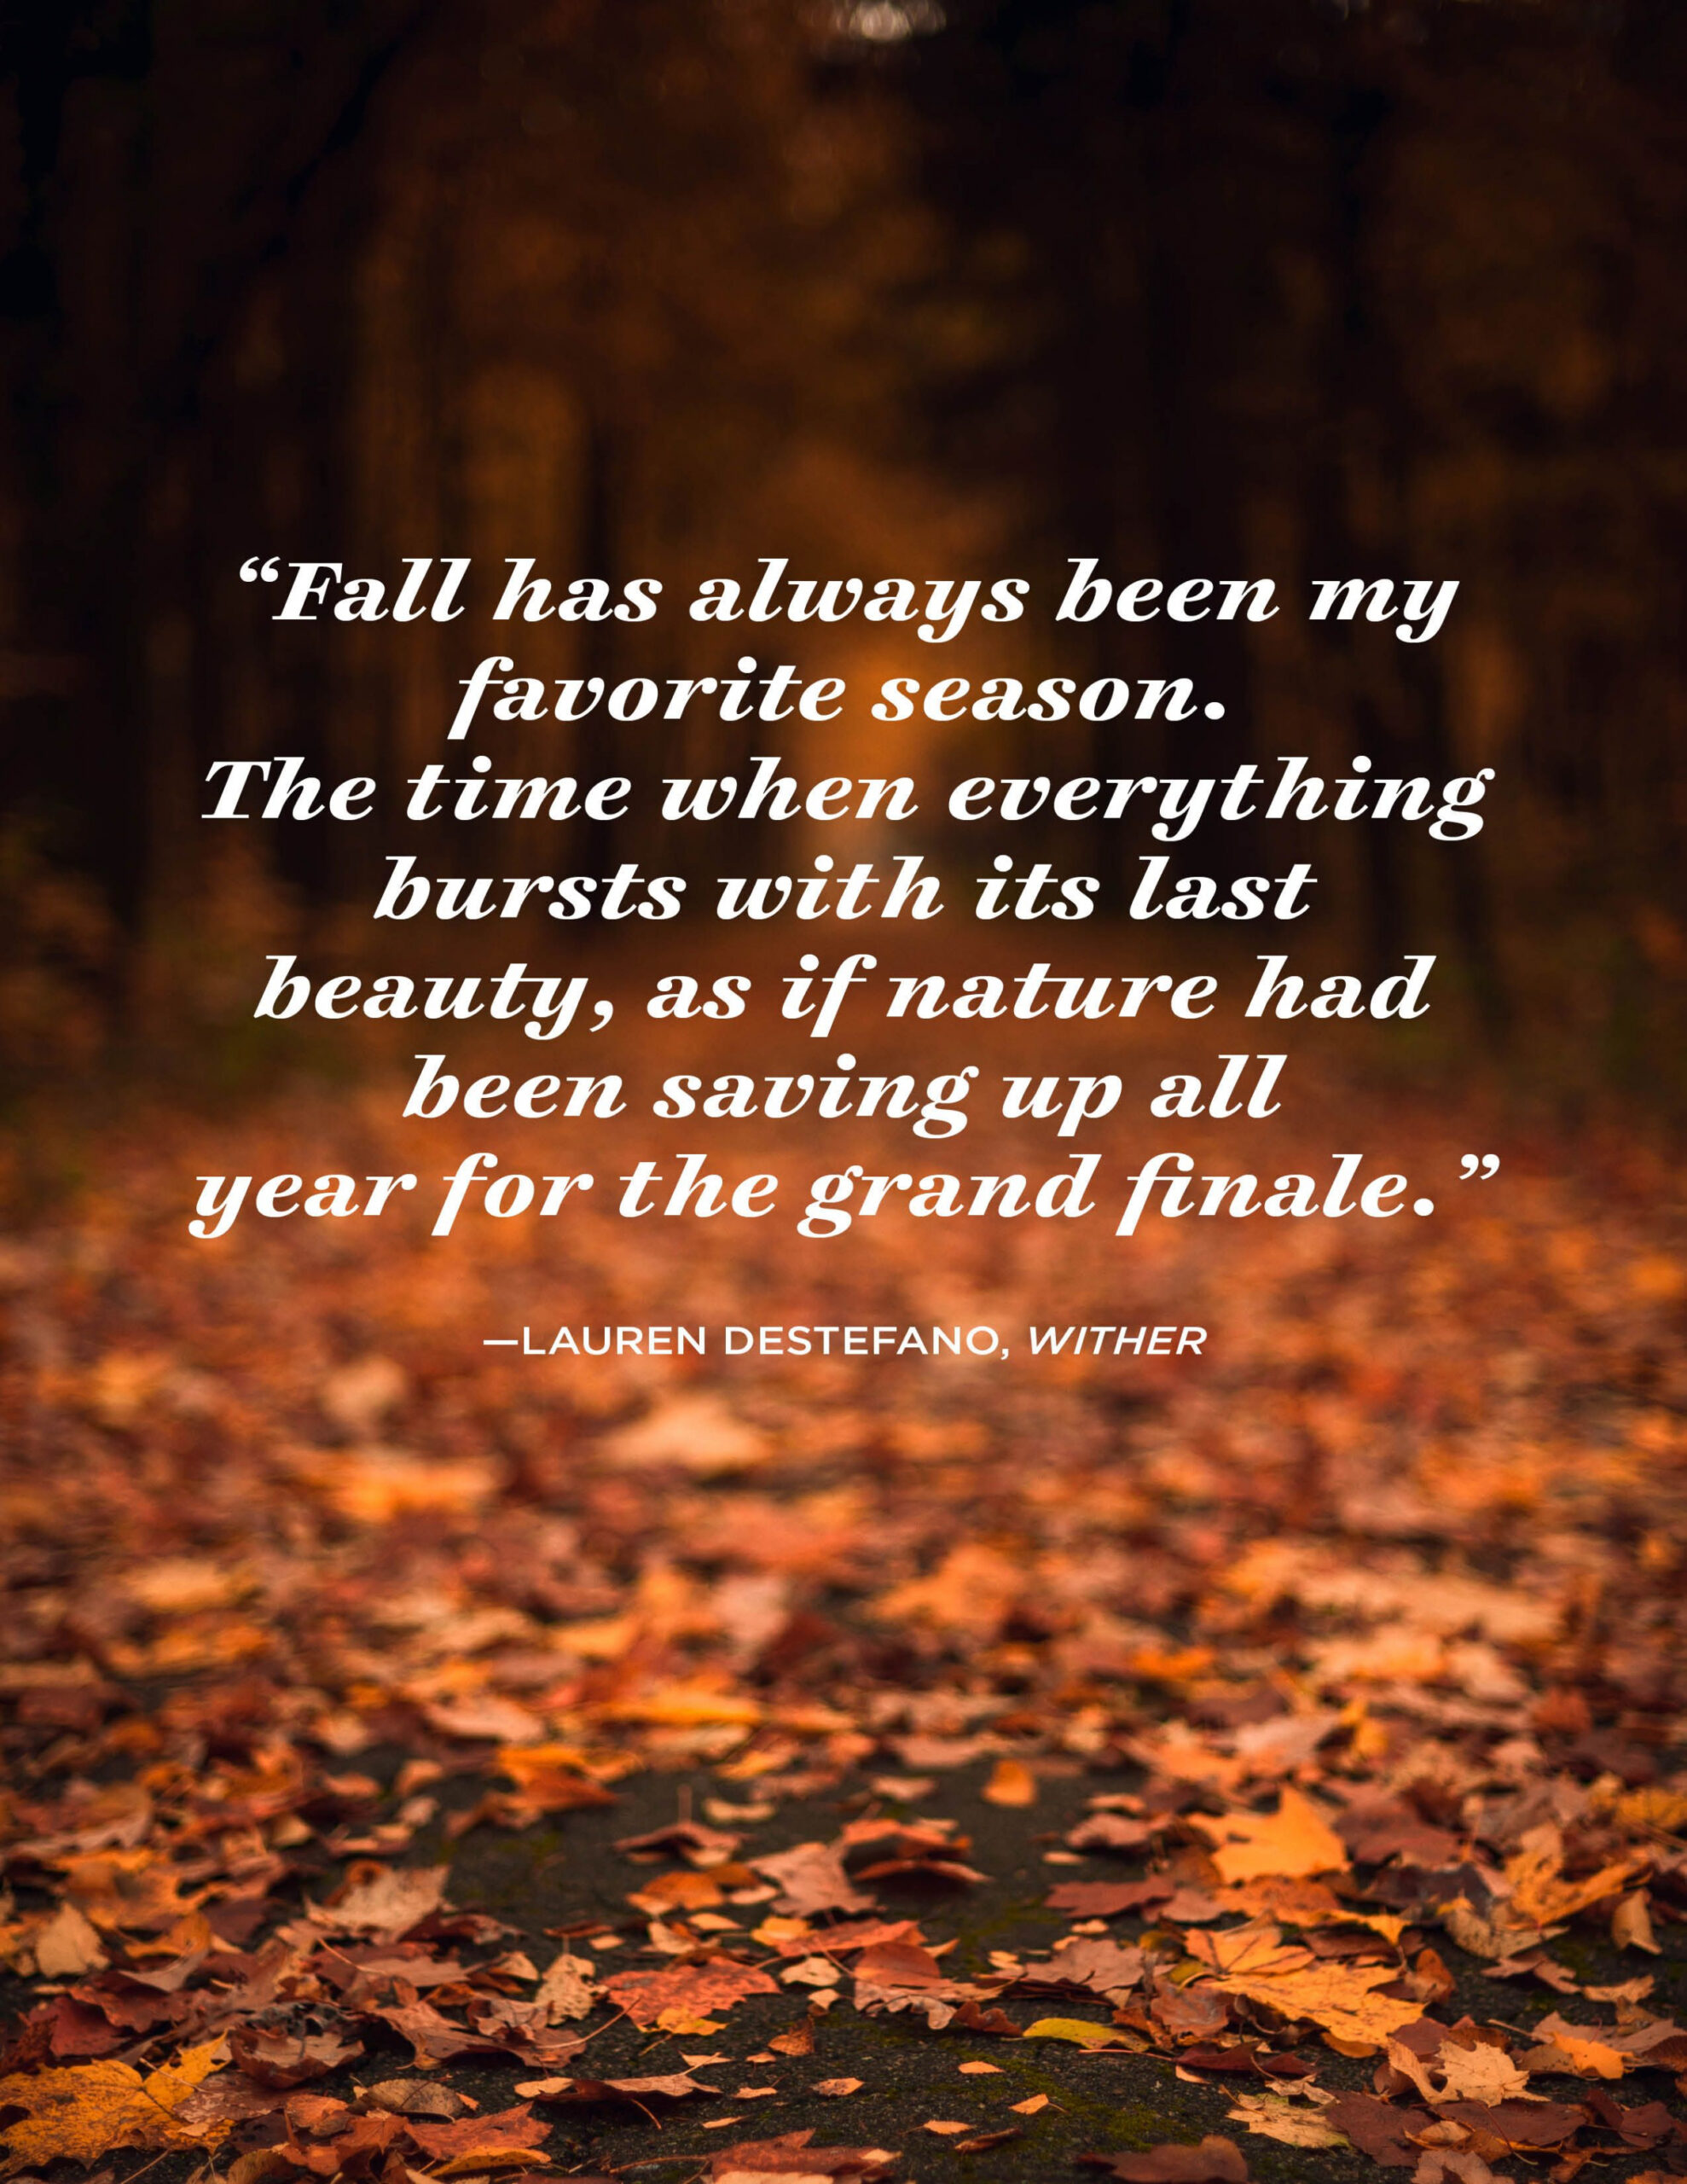 Inspiring November Quotes - Famous Sayings and Quotes about